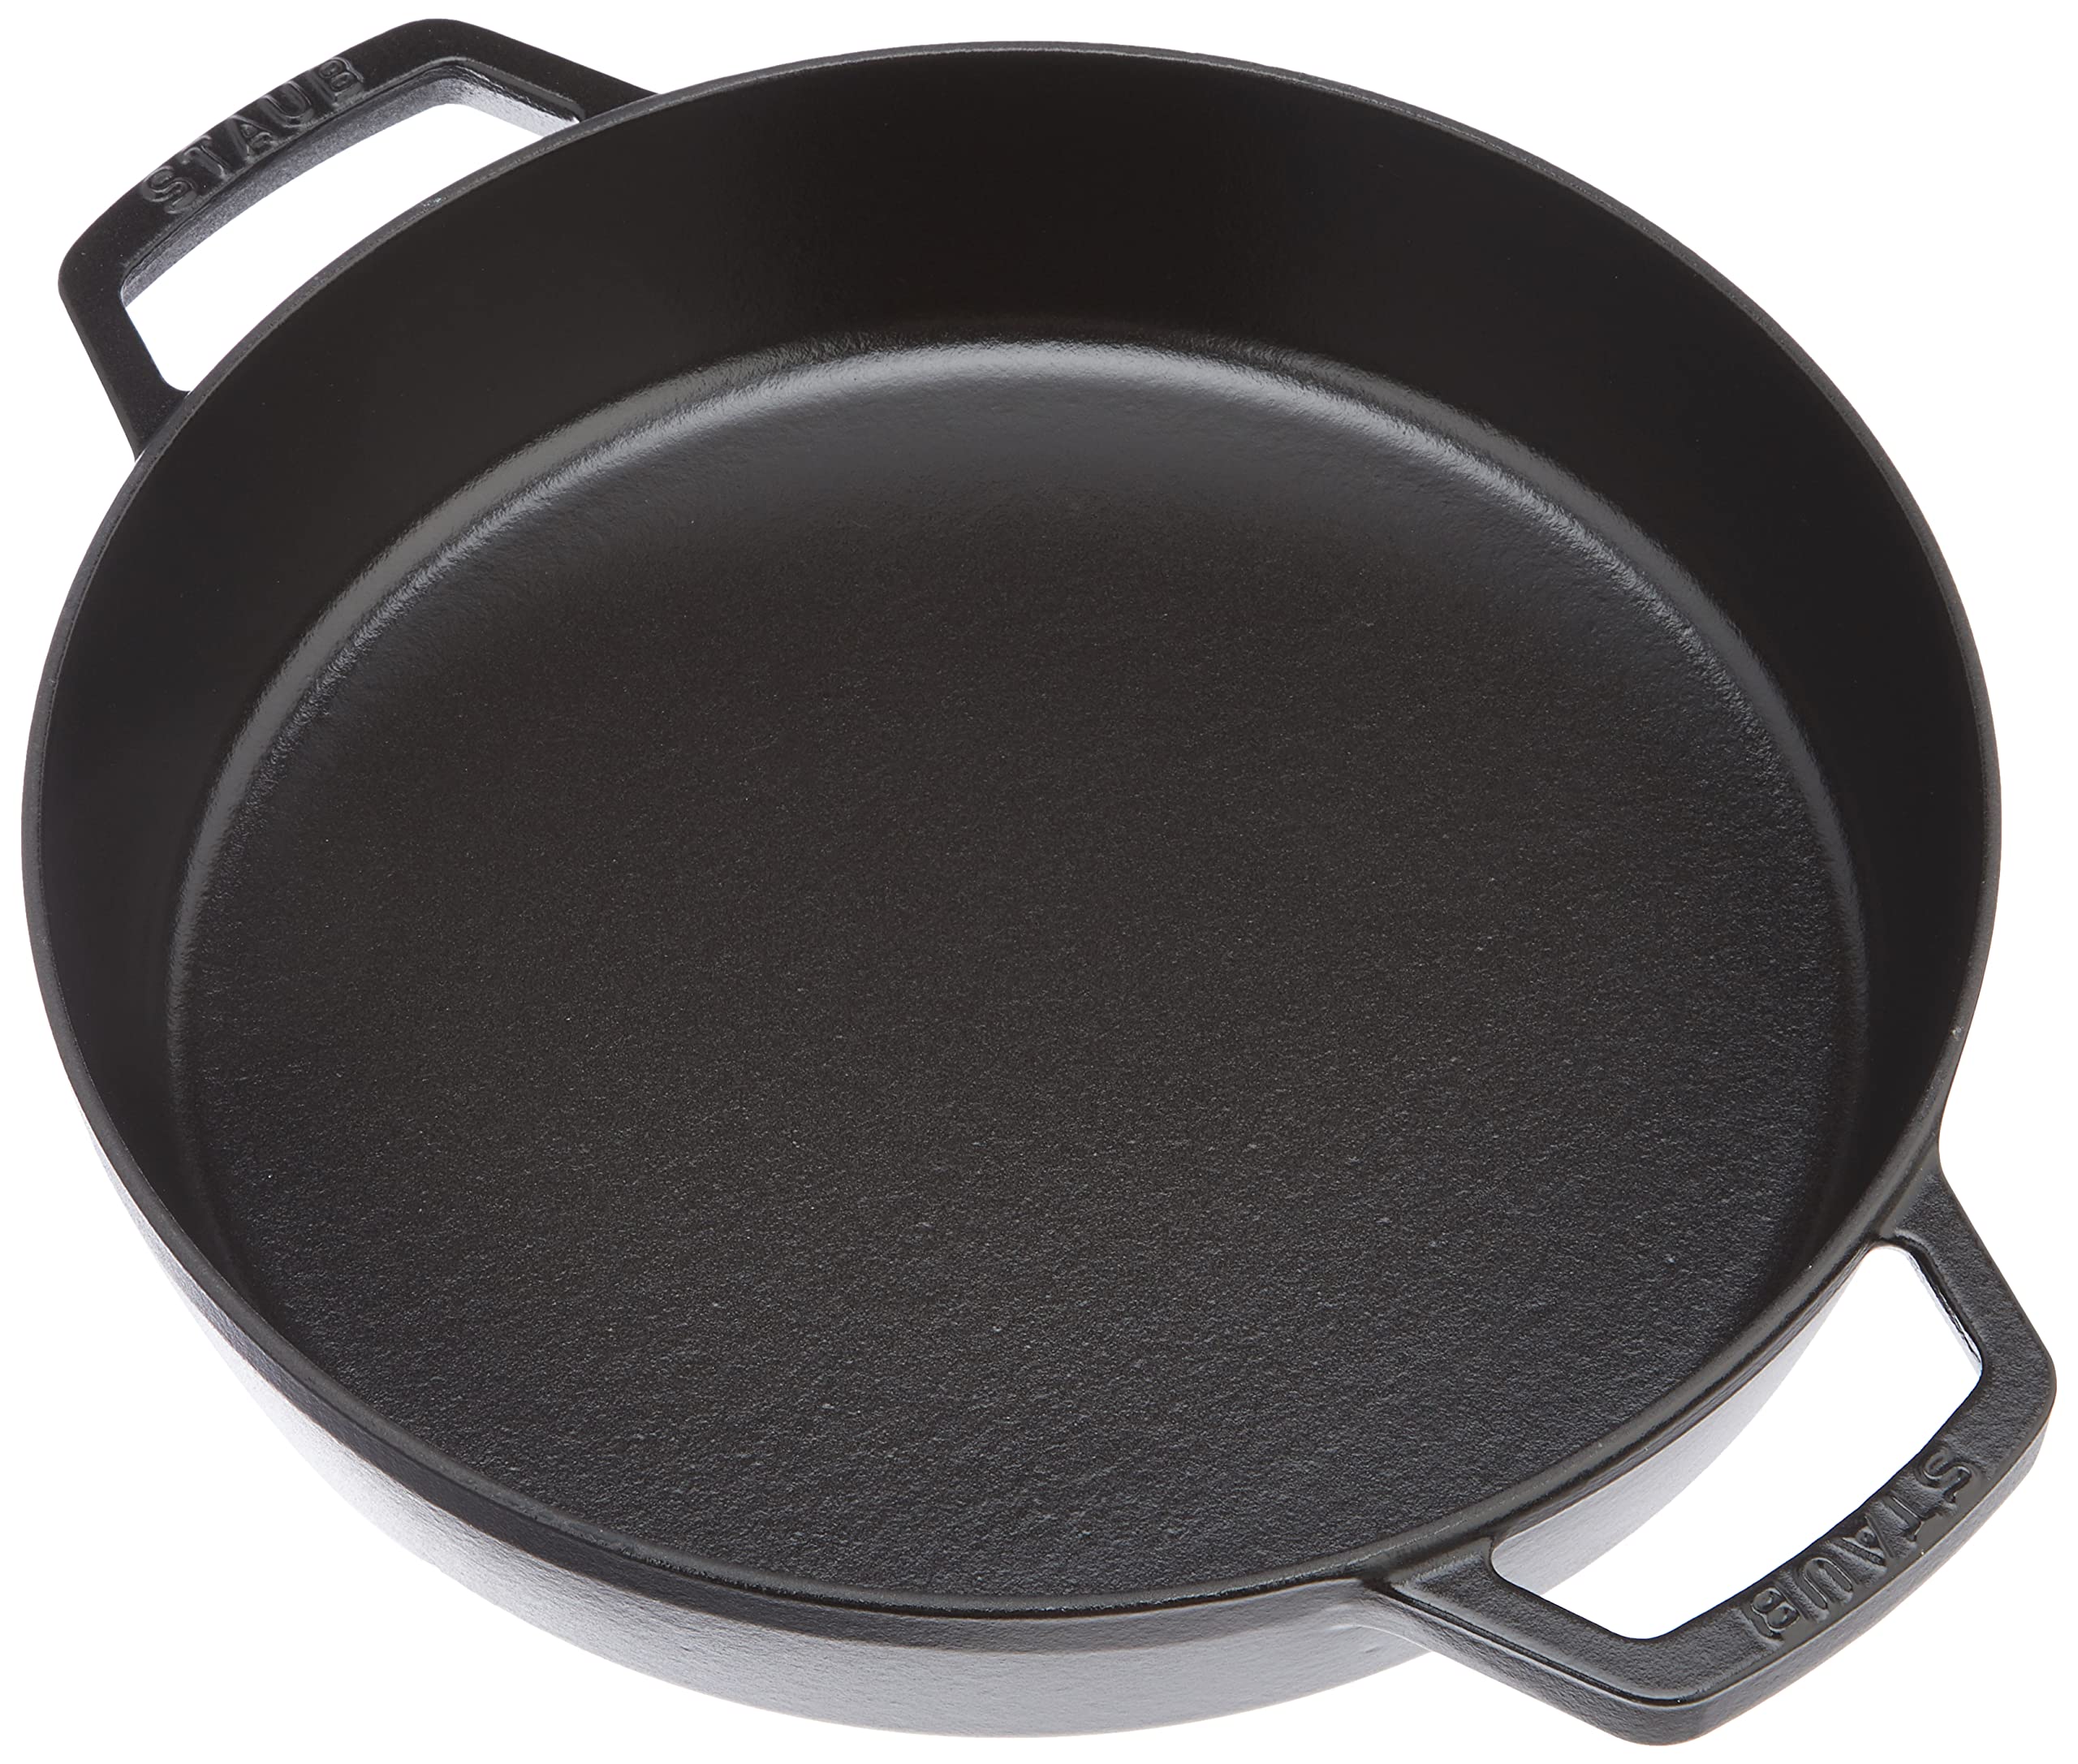 Staub 40511-725 Double Handle Frying Pan, Black, 10.2 inches (26 cm), Skillet, Both Hands, Casting, Enamel, Induction Compatible, Double Handle Frying Pan  - Like New